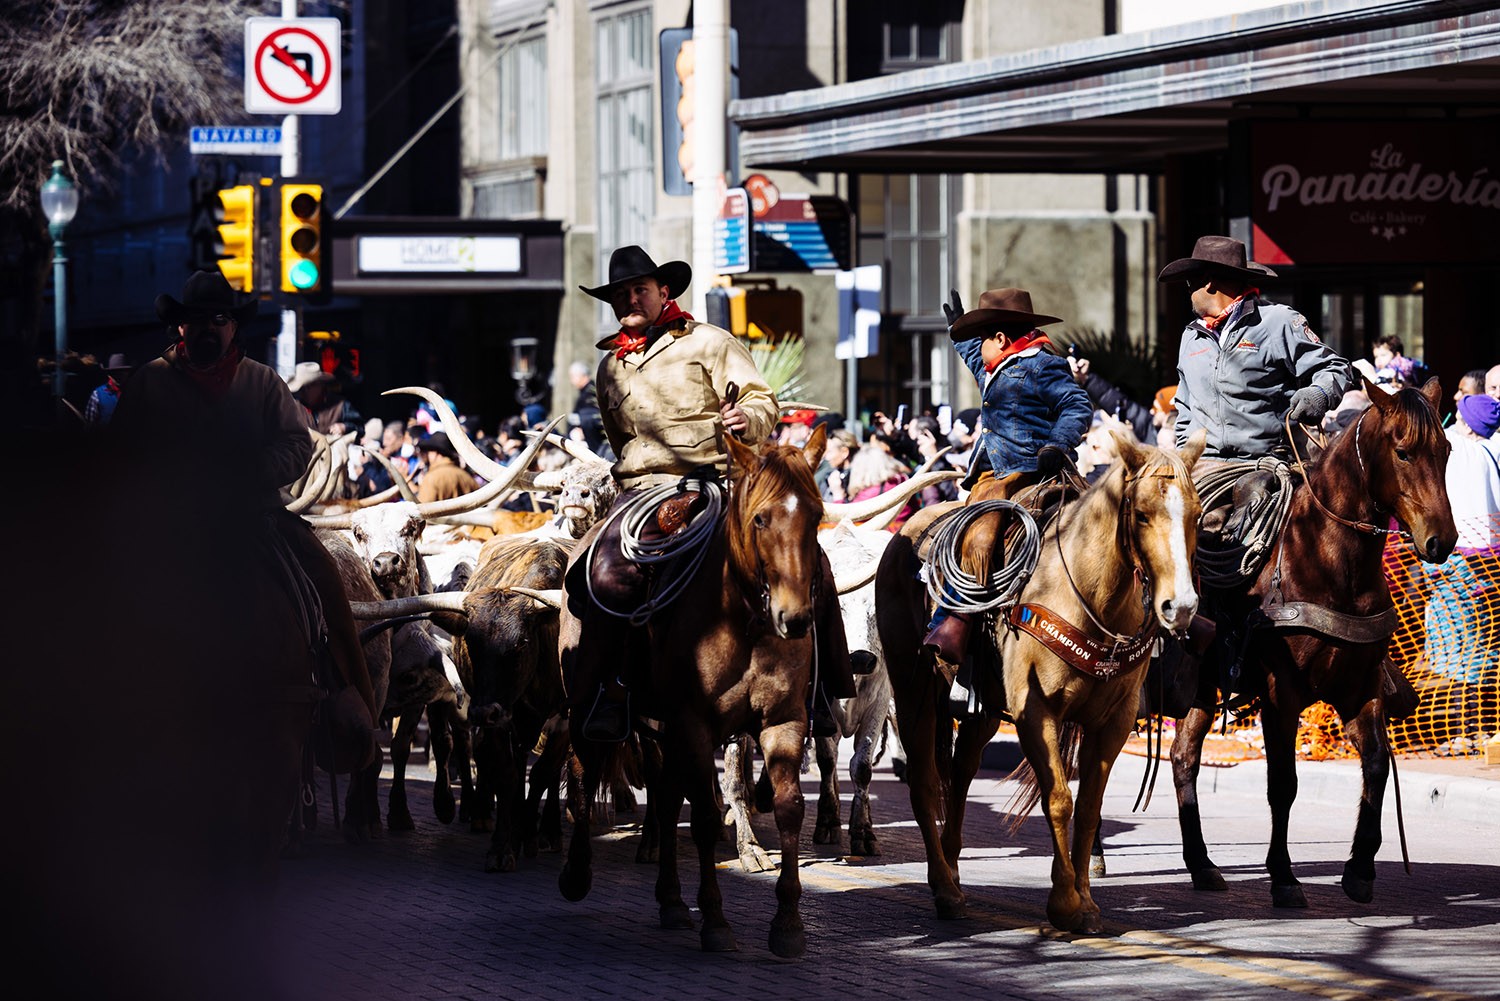 The annual Western Heritage Parade & Cattle Drive takes place on Houston Street in downtown San Antonio, Texas, on Feb. 5, 2022. Photo by Chris Stokes | Heron contributor